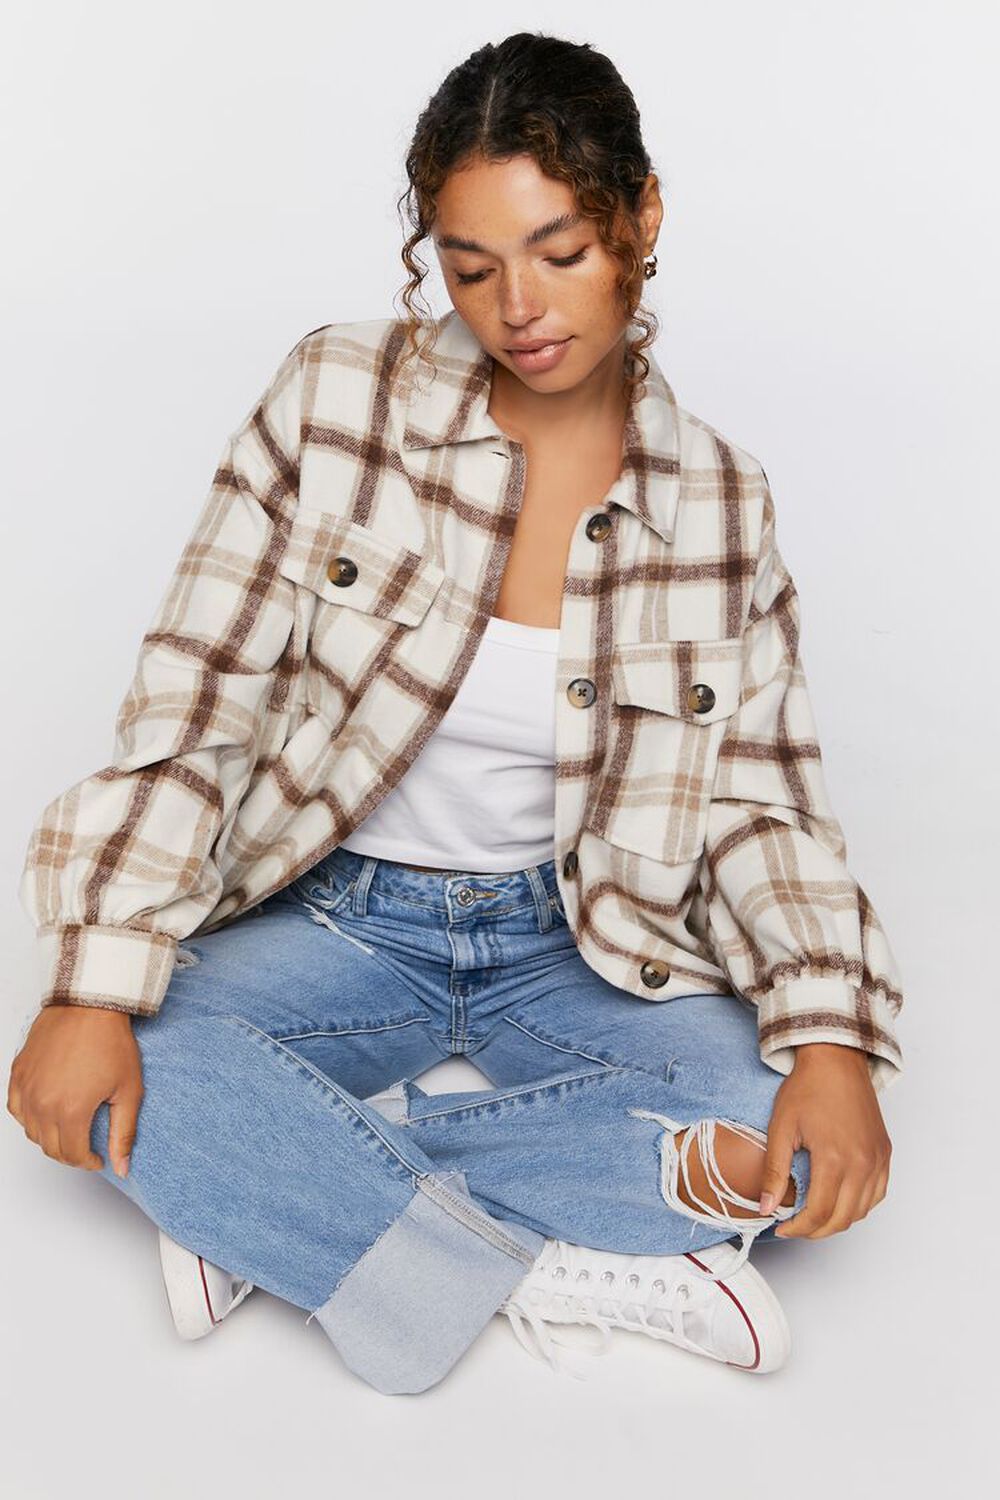 CREAM/BROWN Plaid Button-Up Shacket, image 1